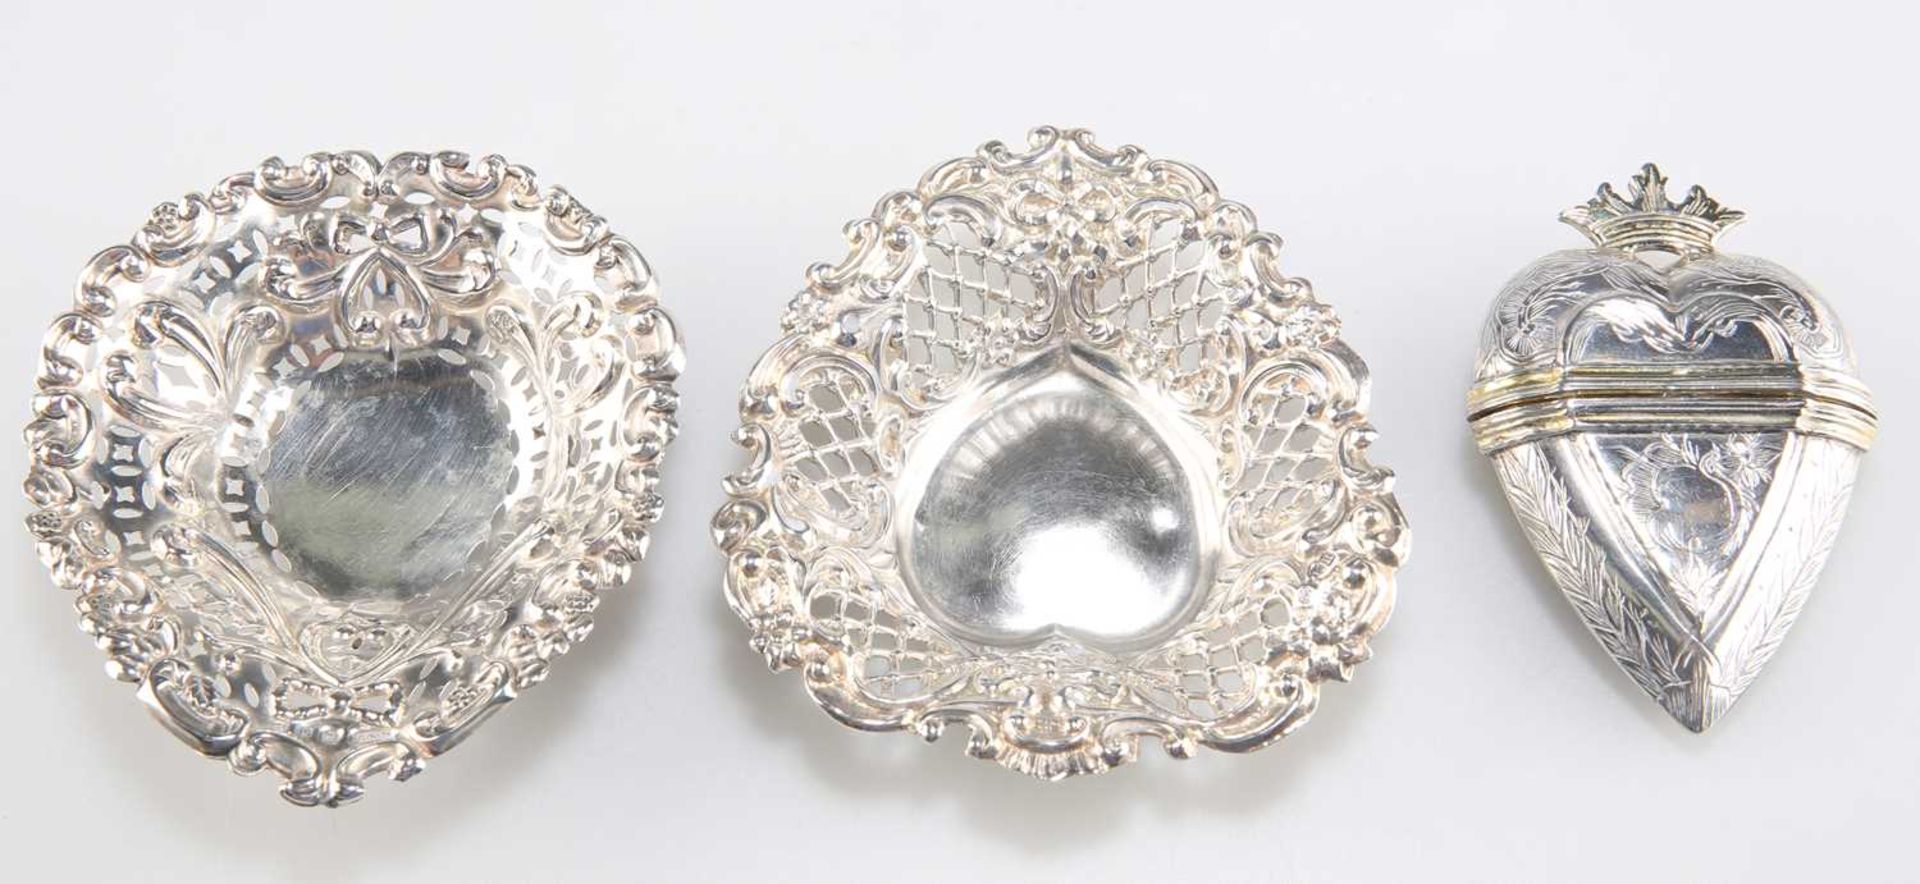 A CONTINENTAL SILVER AND SILVER-GILT MARRIAGE BOX AND TWO PIERCED SILVER TRINKET DISHES